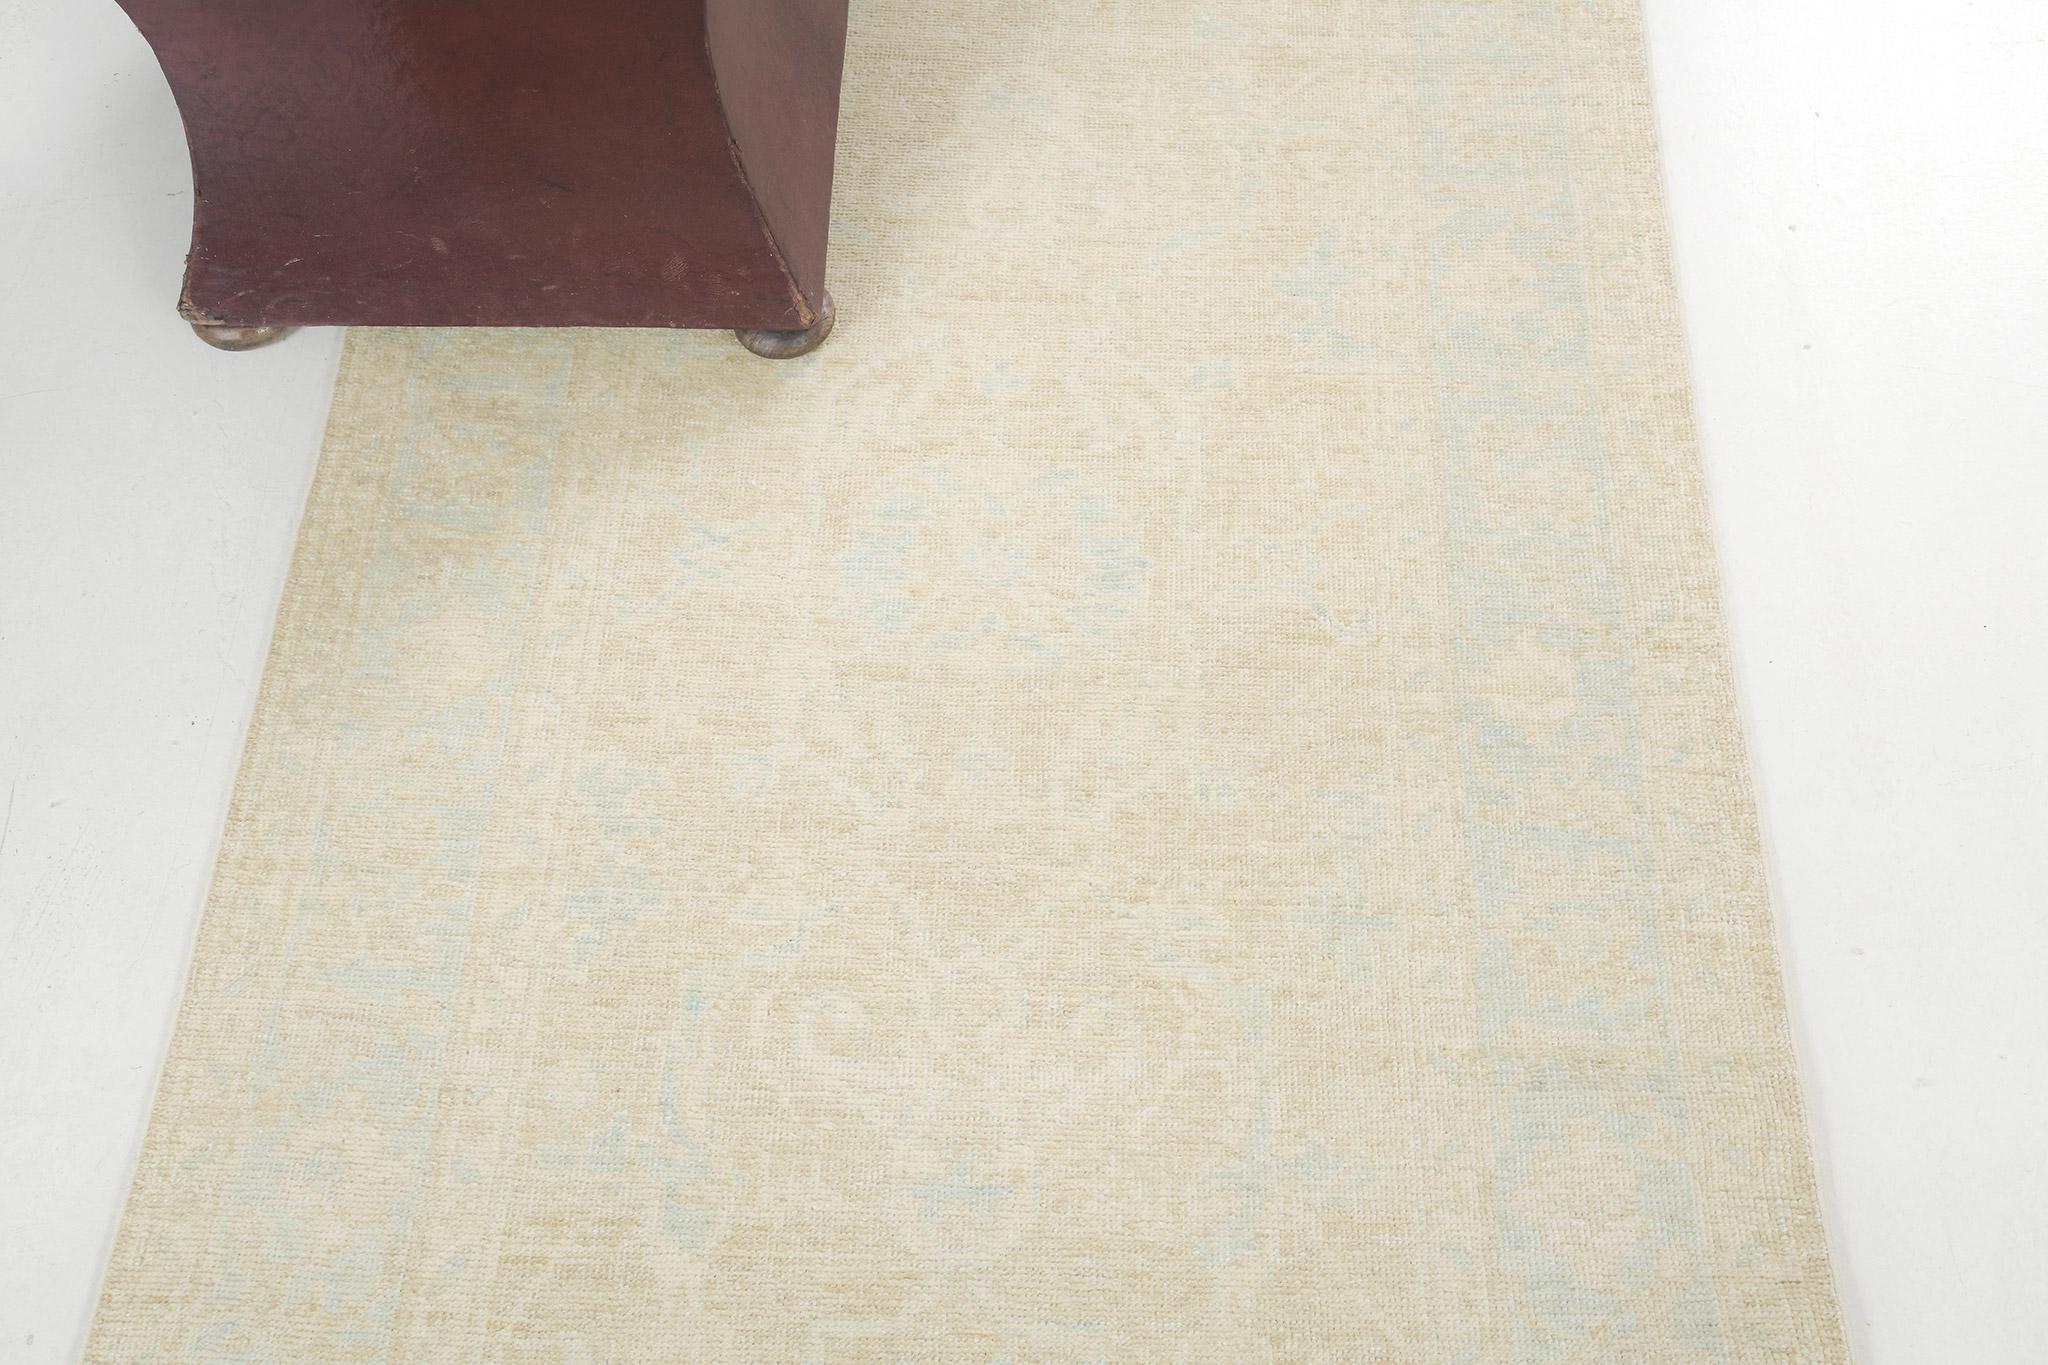 An amazing masterpiece from our Safira Collection has amazing neutral tones that complement the muted blue of the glamorous elements and scrolls. It creates a soulful balance of everything from modern decor to contemporary design.

Rug